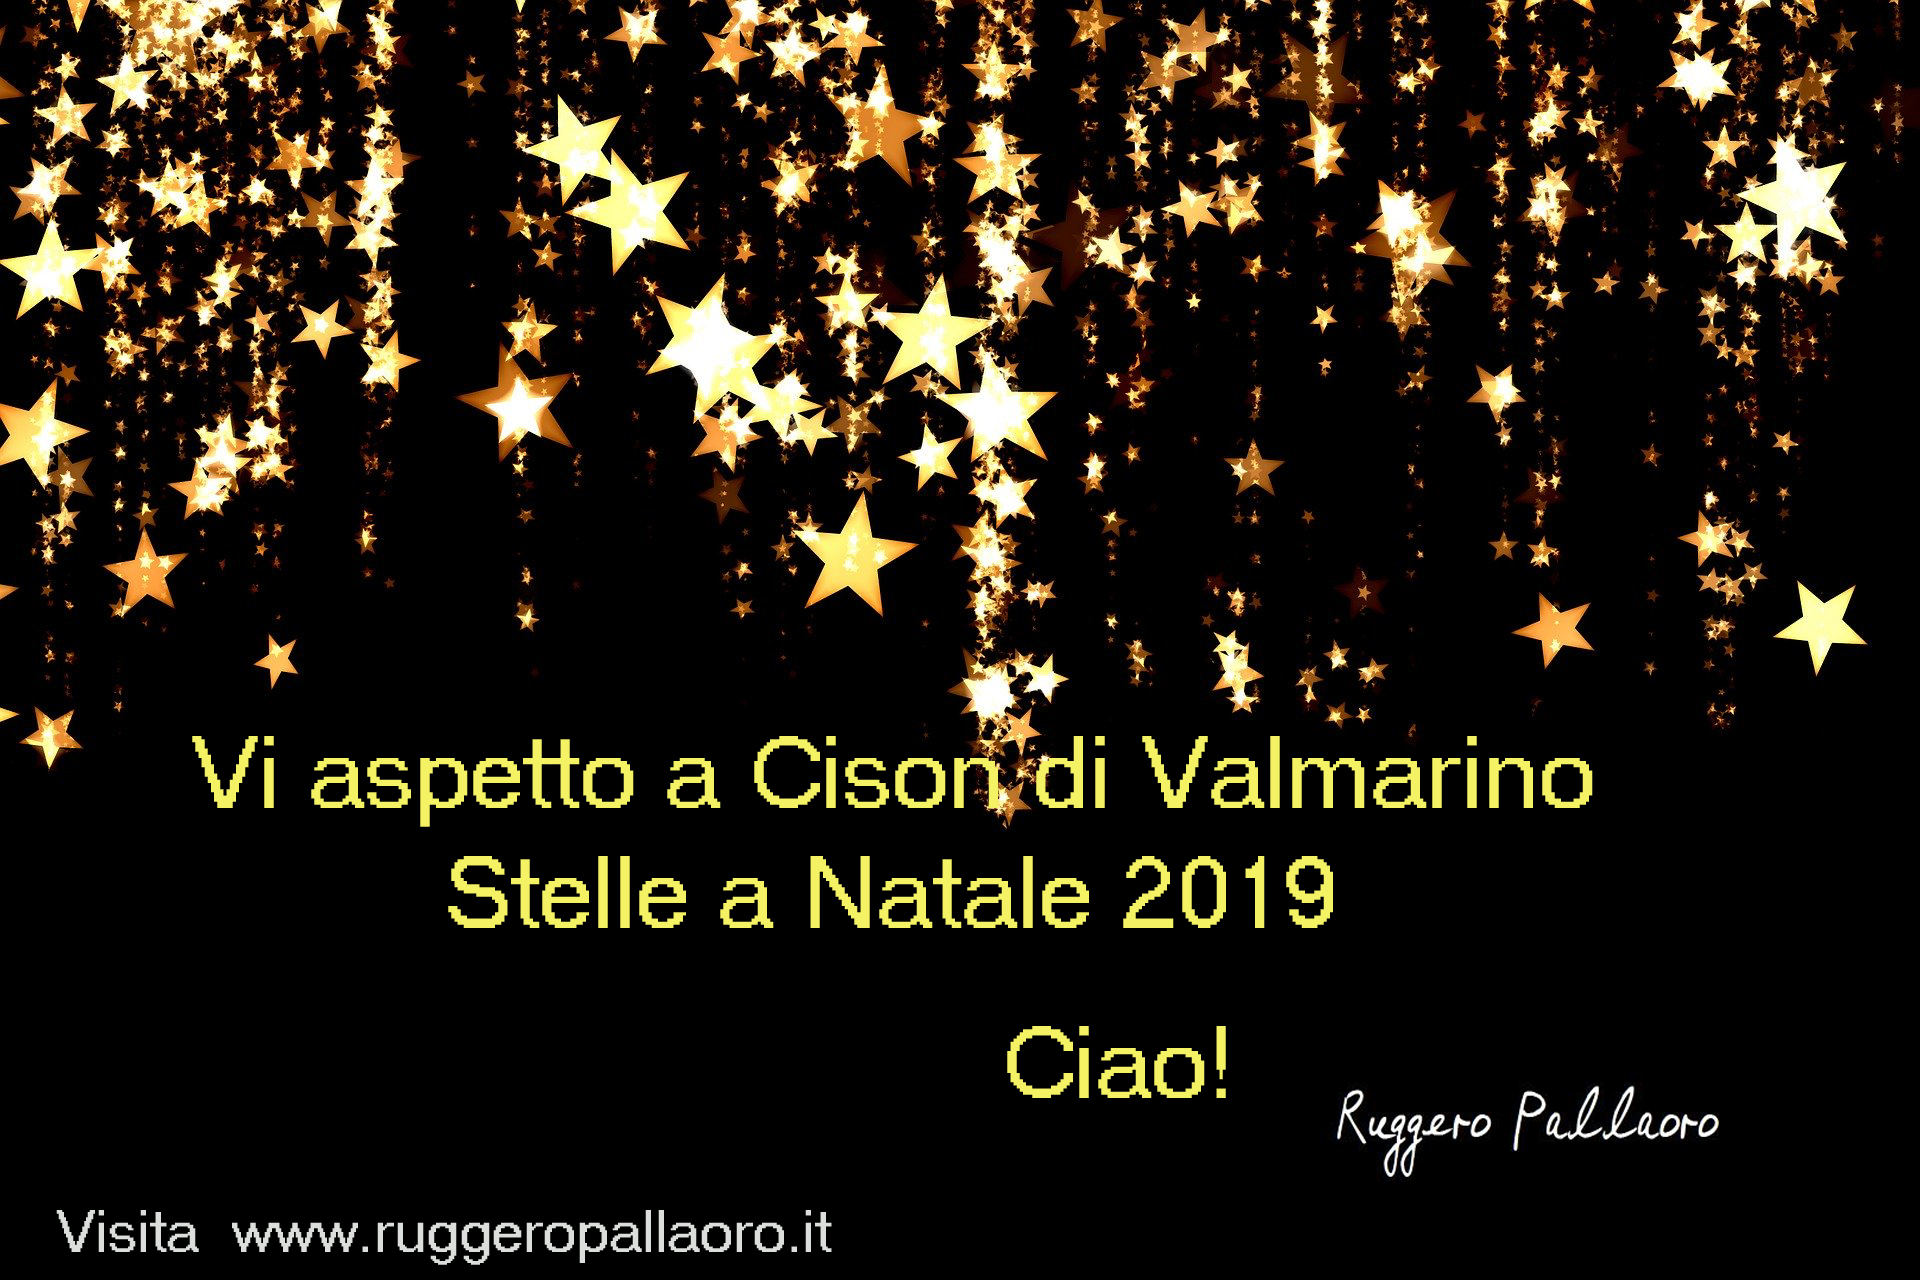 Stelle a Natale 2019